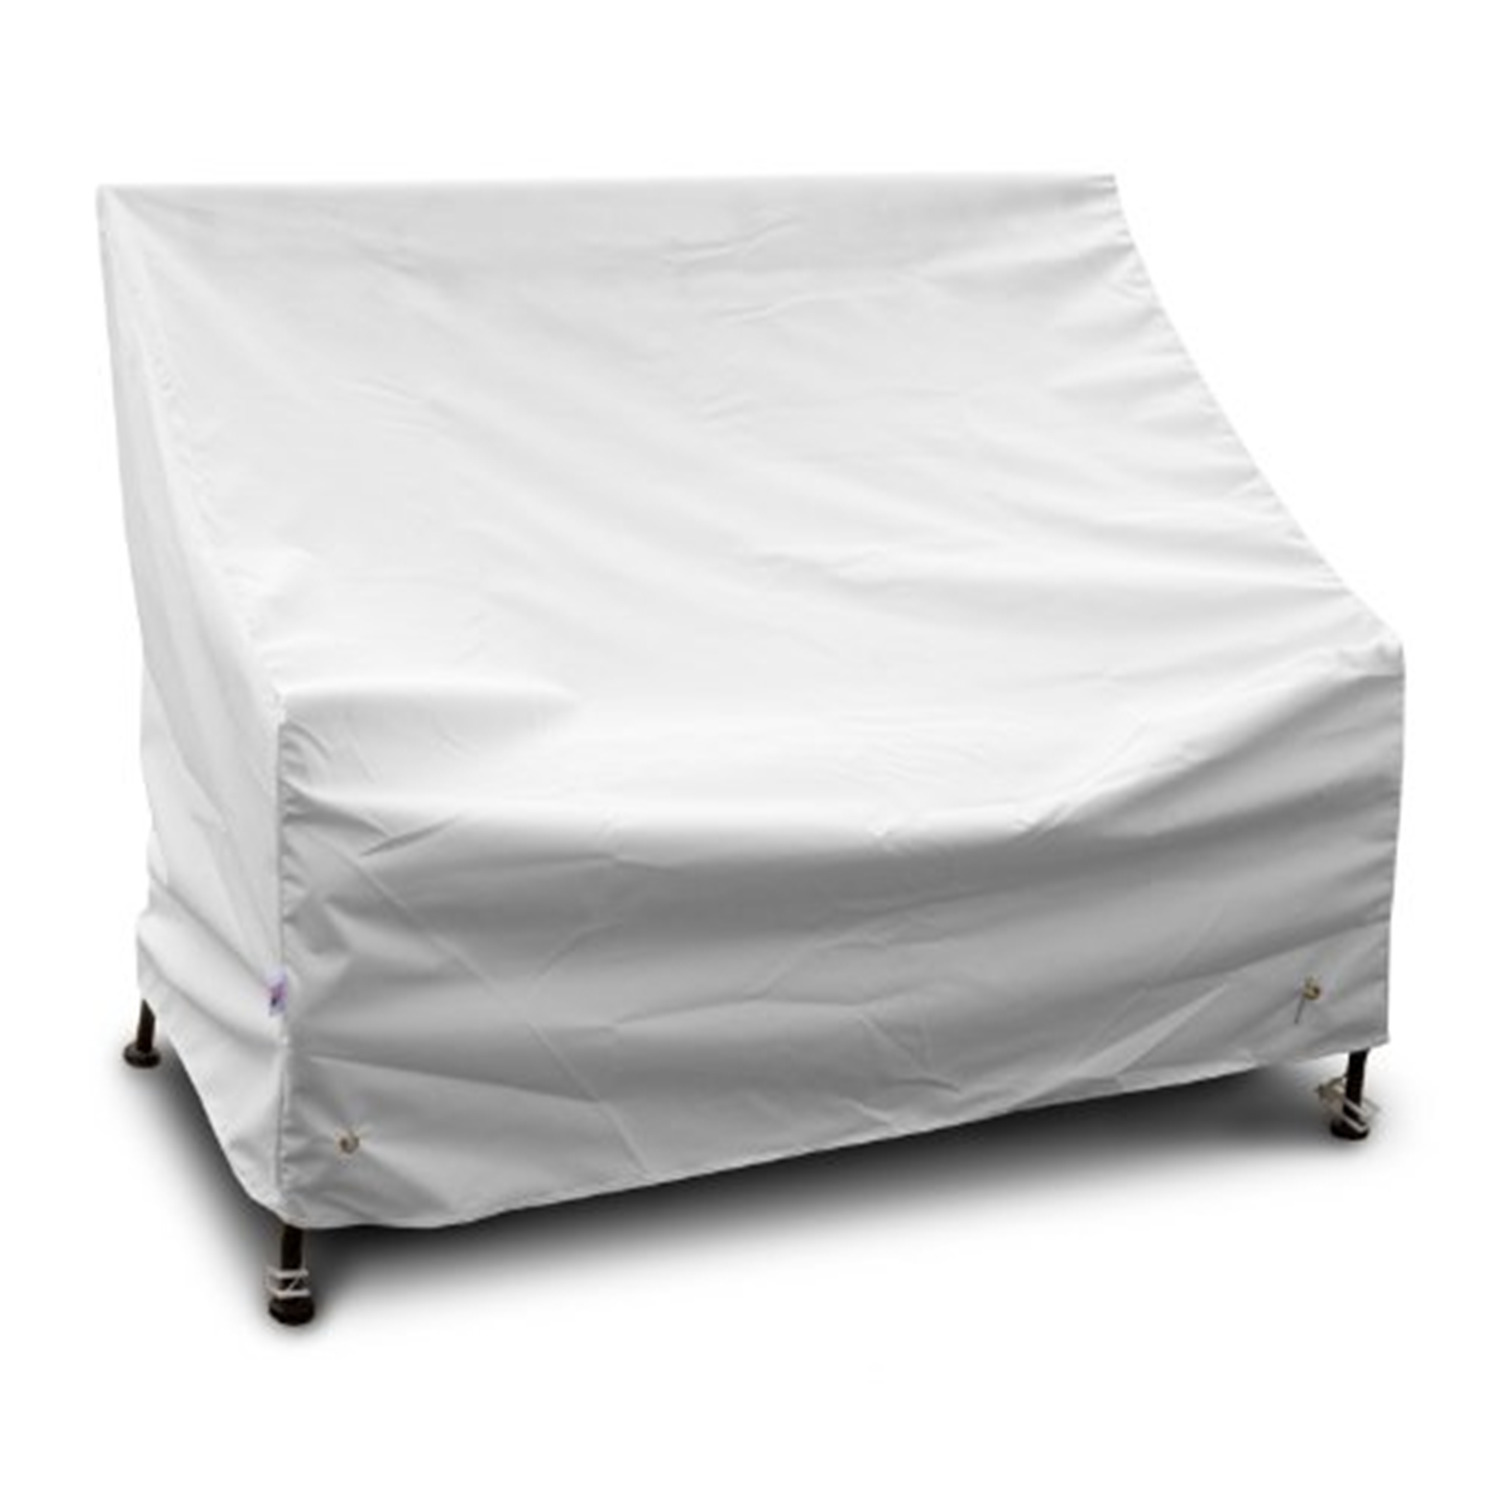 KoverRoos 14202 Weathermax 4 ft Bench-Glider Cover, White - 51 W x 26 D x 35 H in. - image 1 of 2